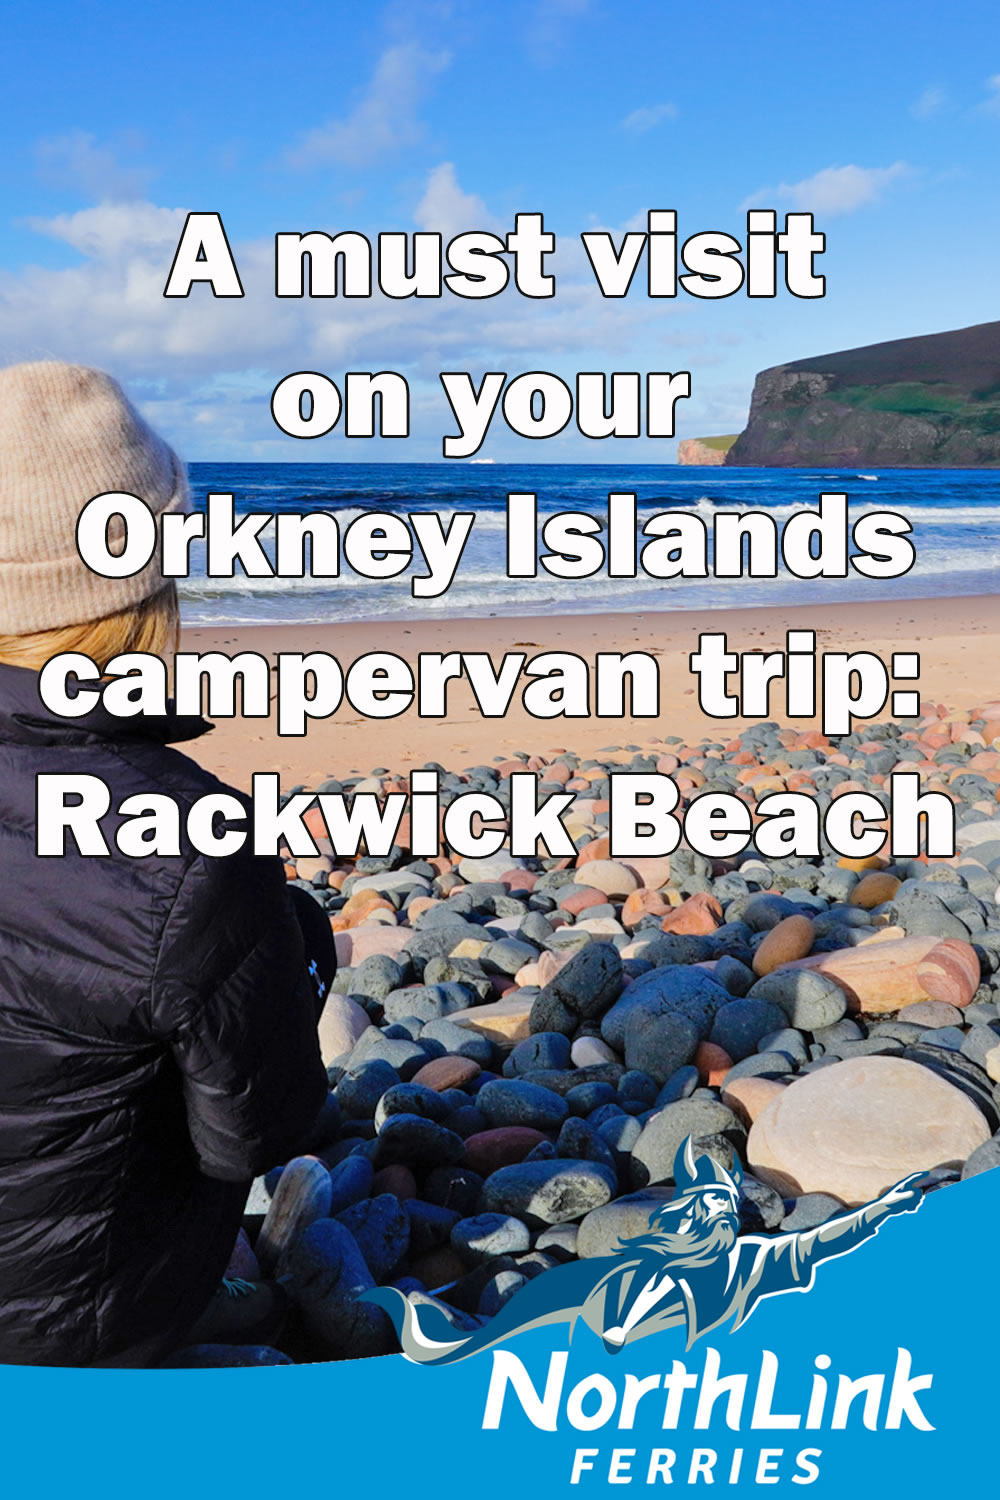 A must visit on your Orkney Islands campervan trip: Rackwick Beach